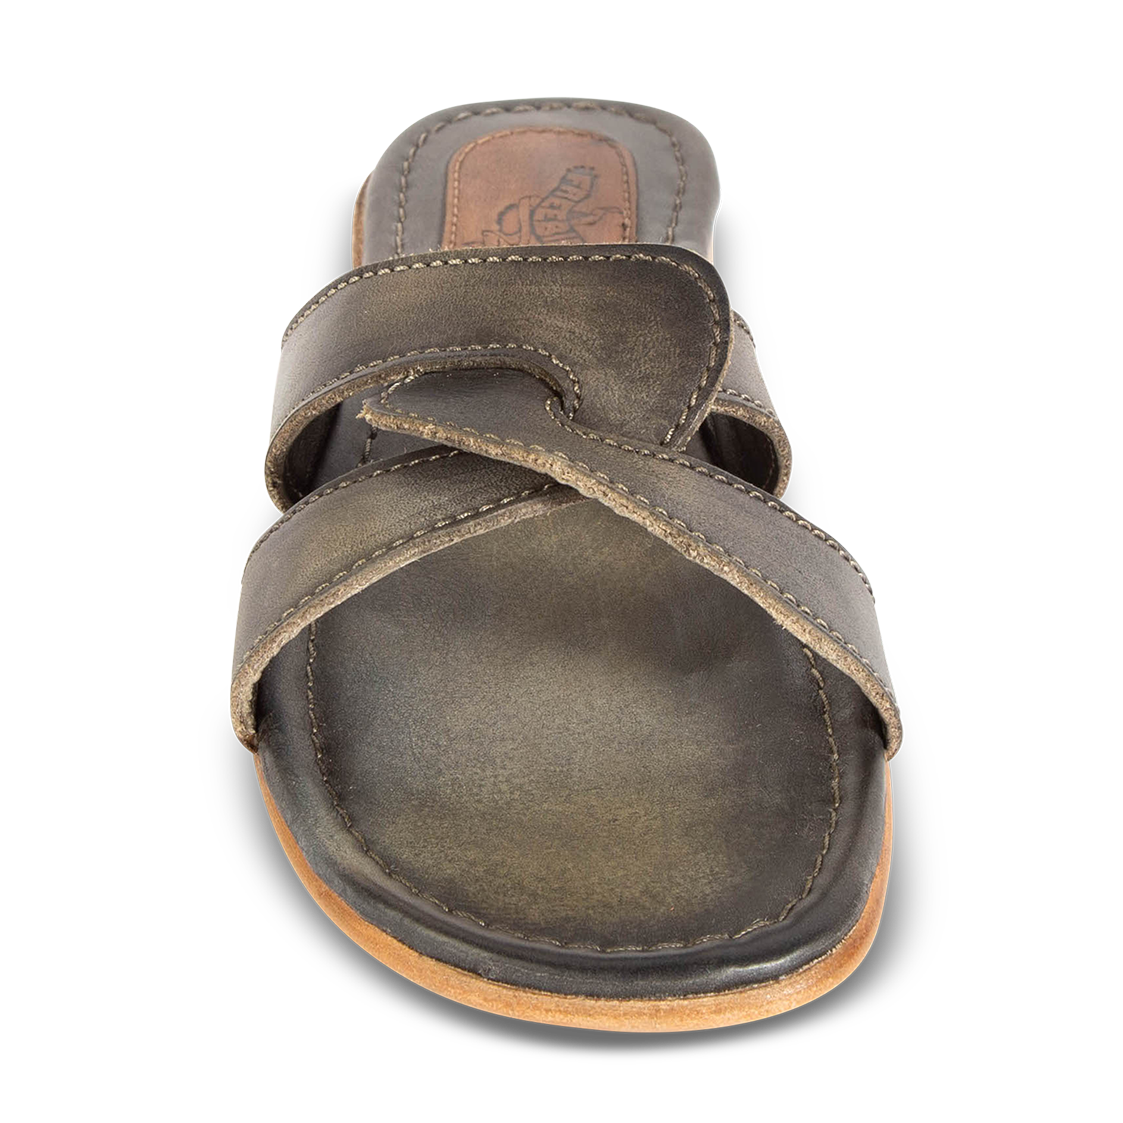 Front view showing FREEBIRD criss-cross leather foot strap on women's Sawyer olive low heeled sandal